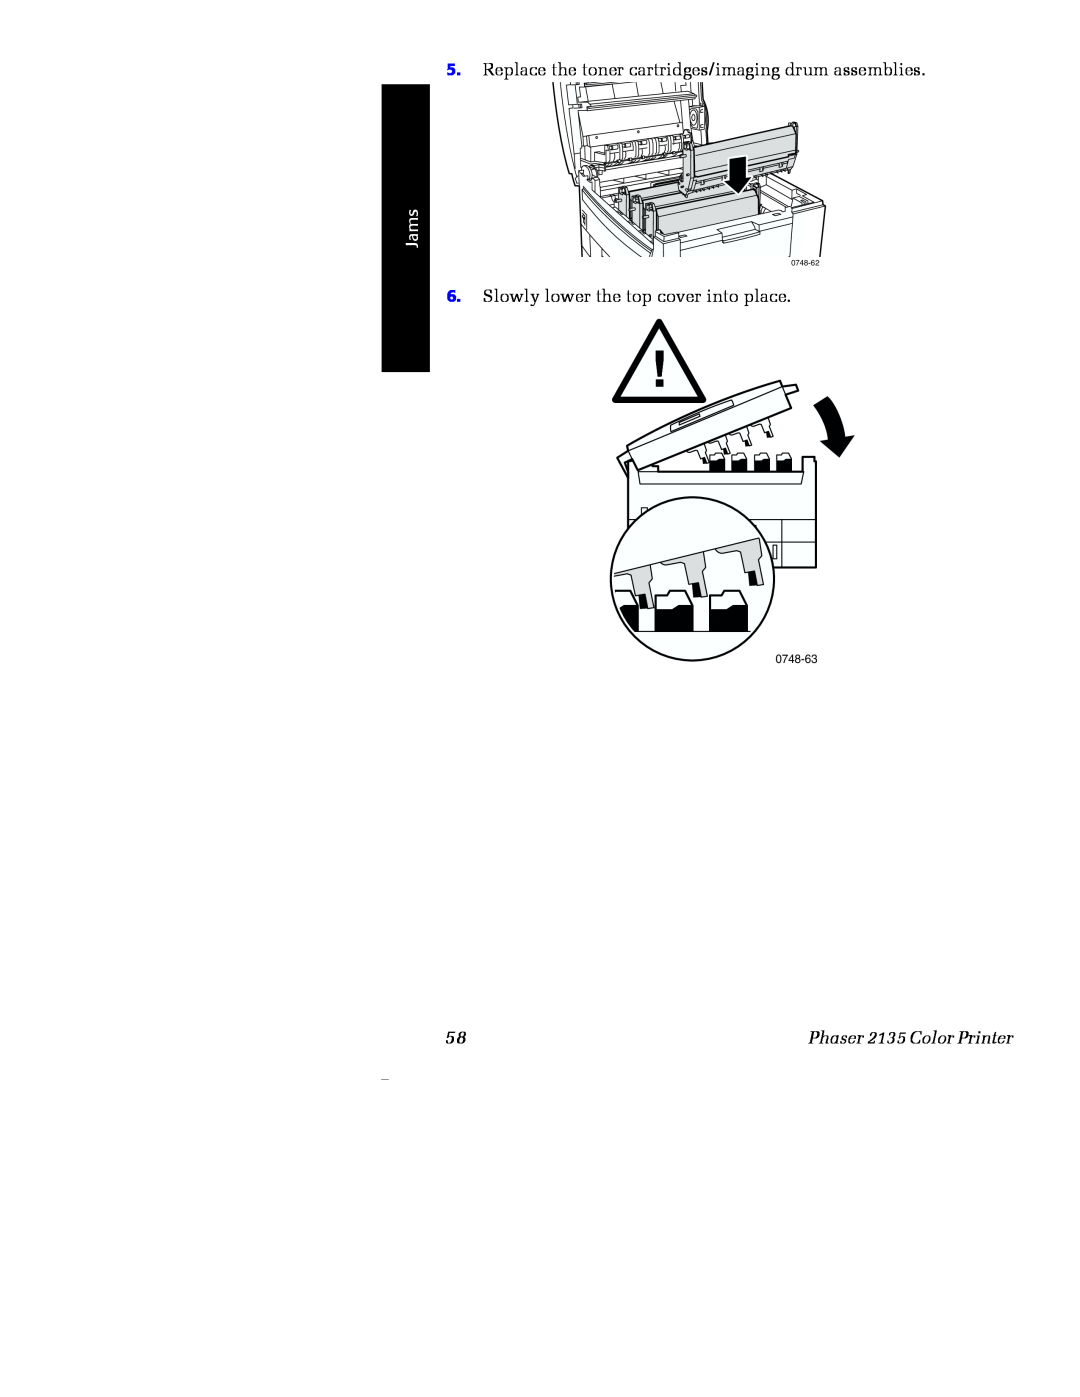 Xerox Phaser 2135 manual Replace the toner cartridges/imaging drum assemblies, Jams, Slowly lower the top cover into place 